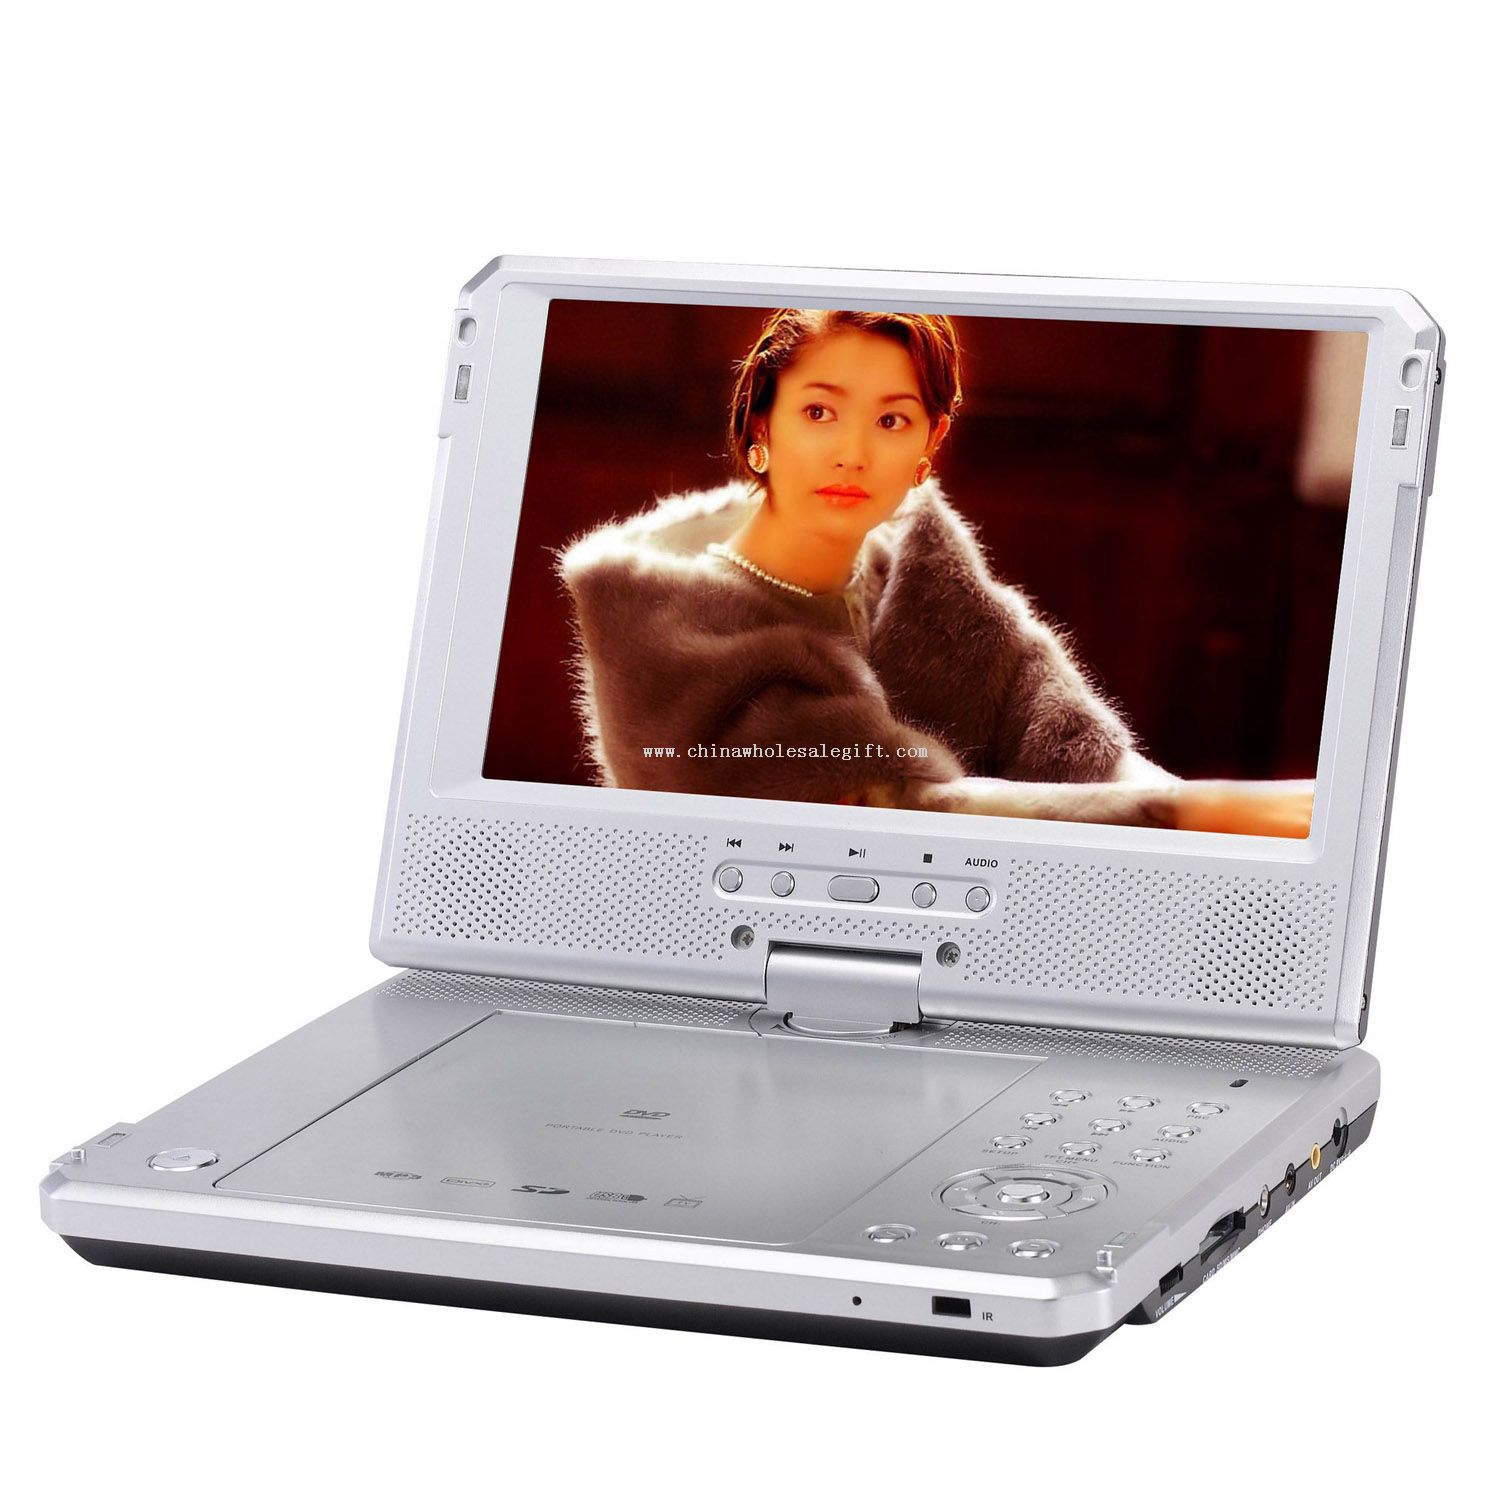 8.5 inch Portable DVD Player Build In TV Tuner with USB Port 1/3 Card Reader